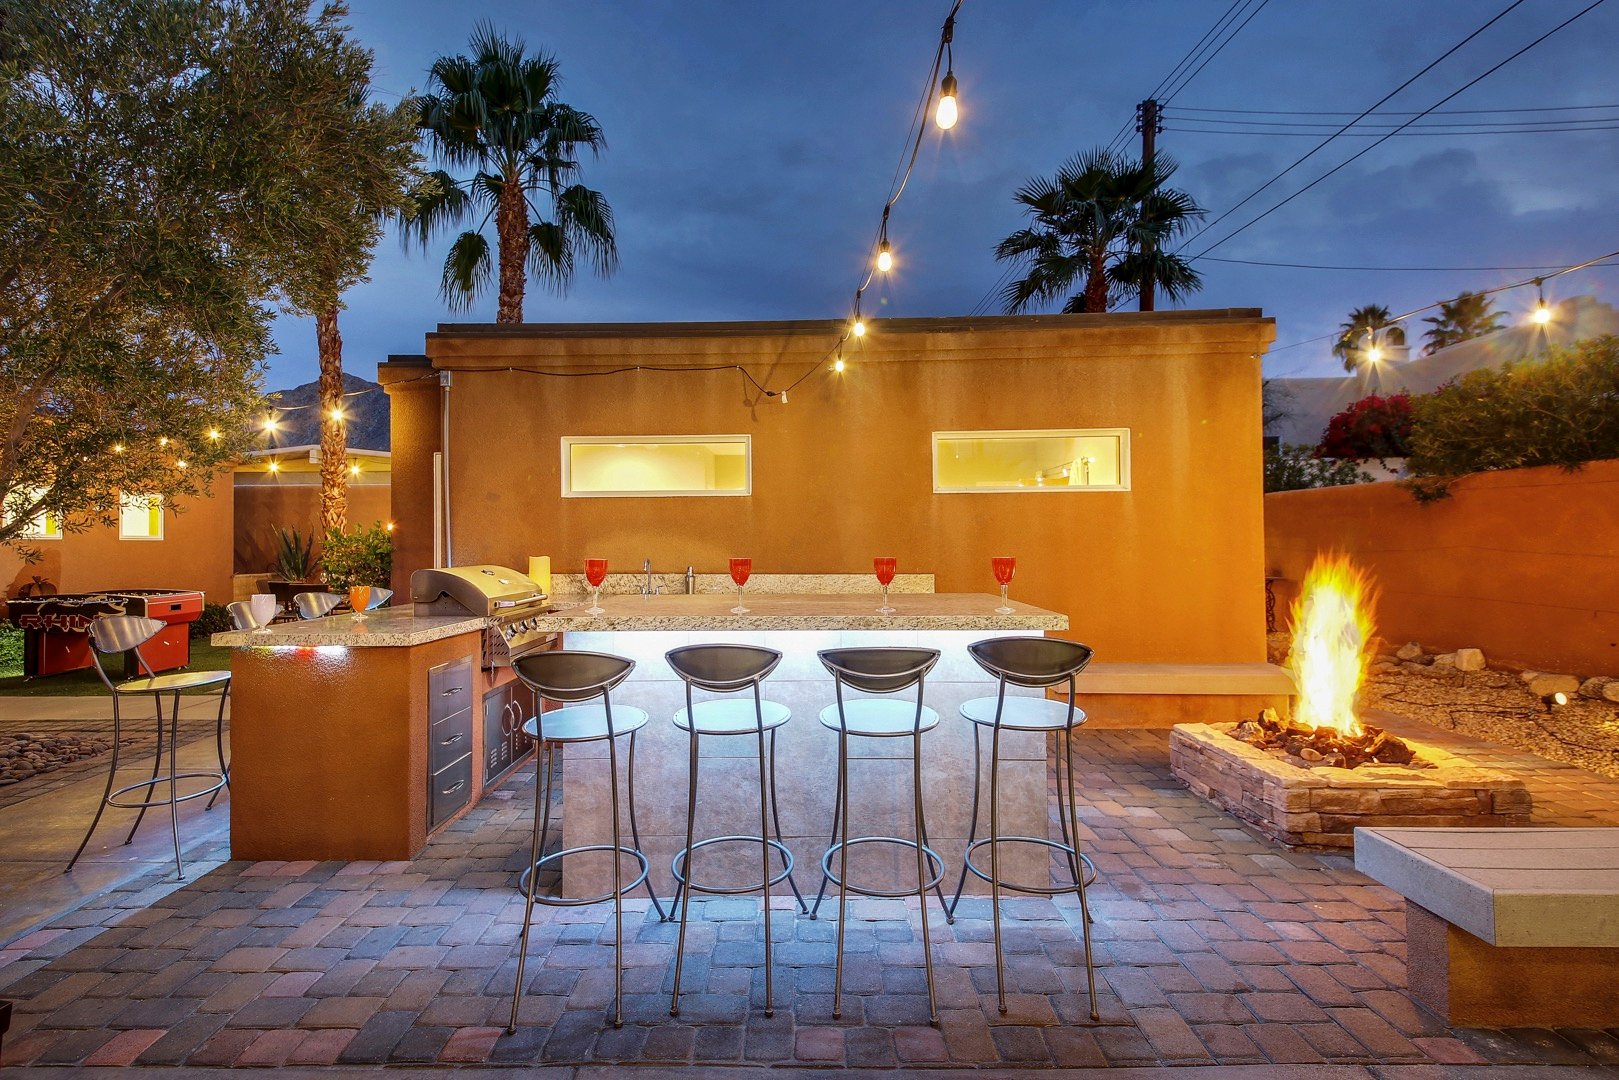 Have after dinner drinks on the built in Barbecue are featuring high top chairs for eight!